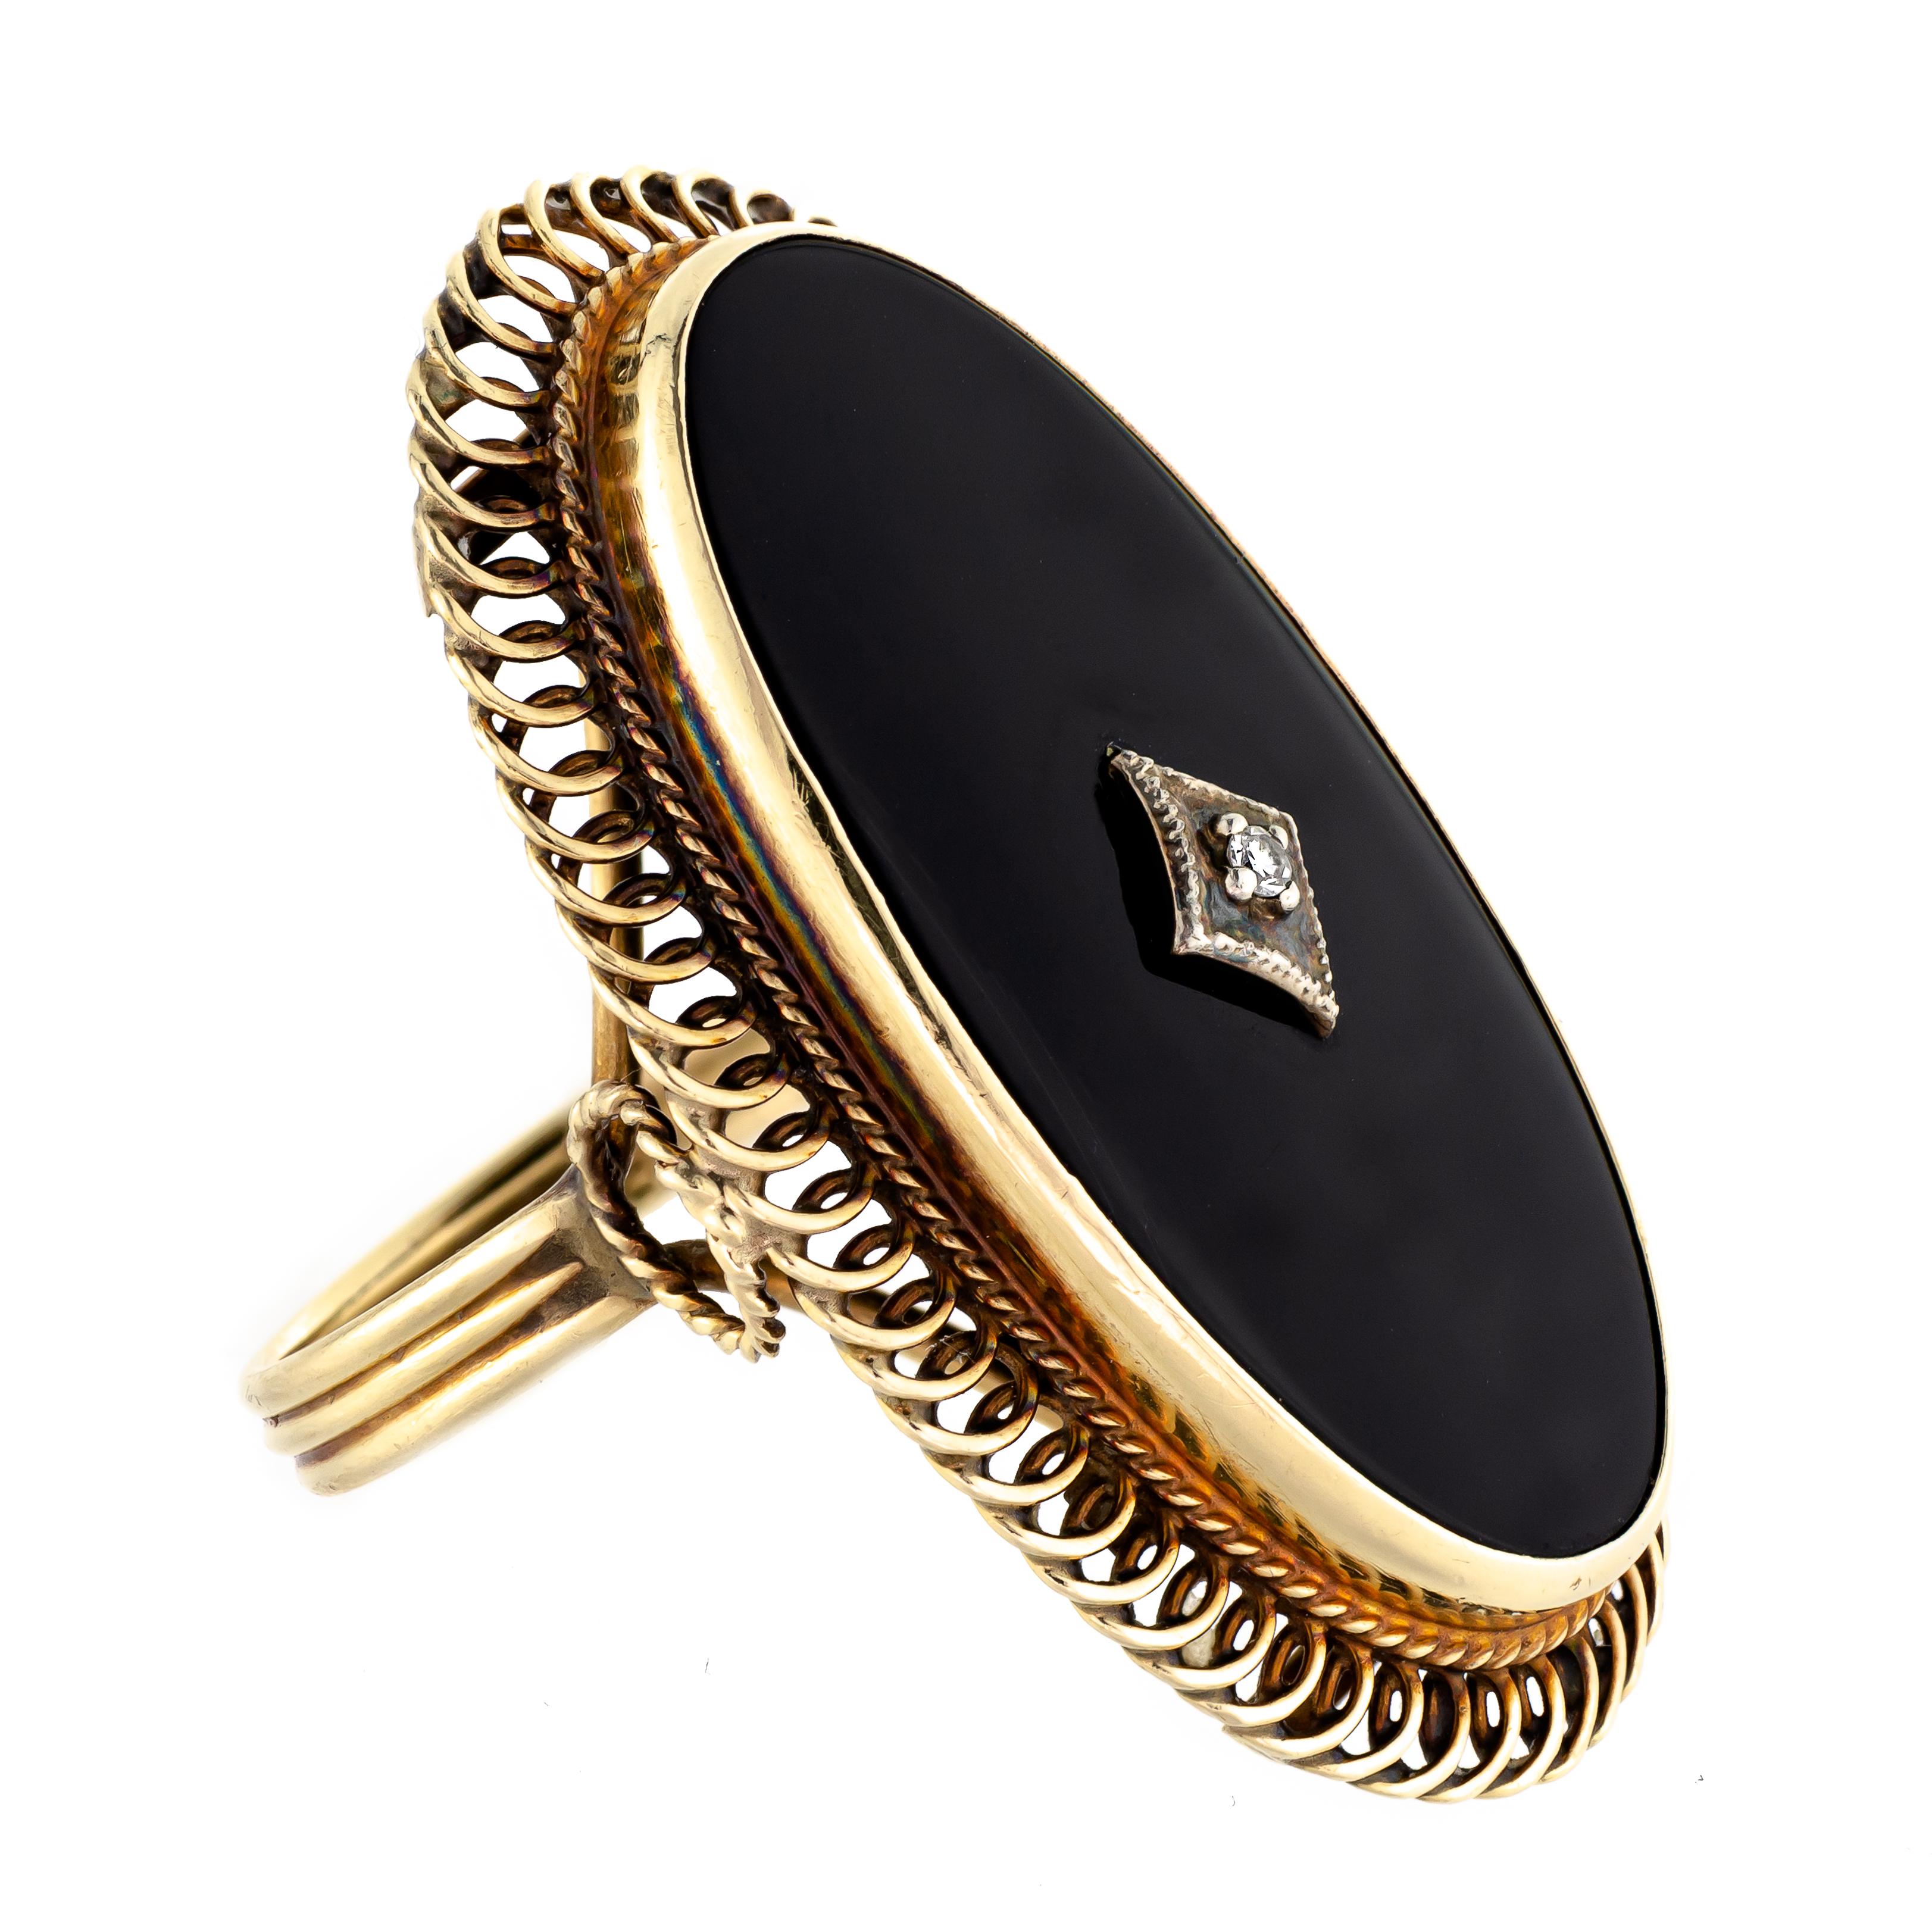 This is a remarkable black onyx diamond ring from the 1930s, crafted from 14kt yellow gold. The ring boasts an impressive size of 1 1/2